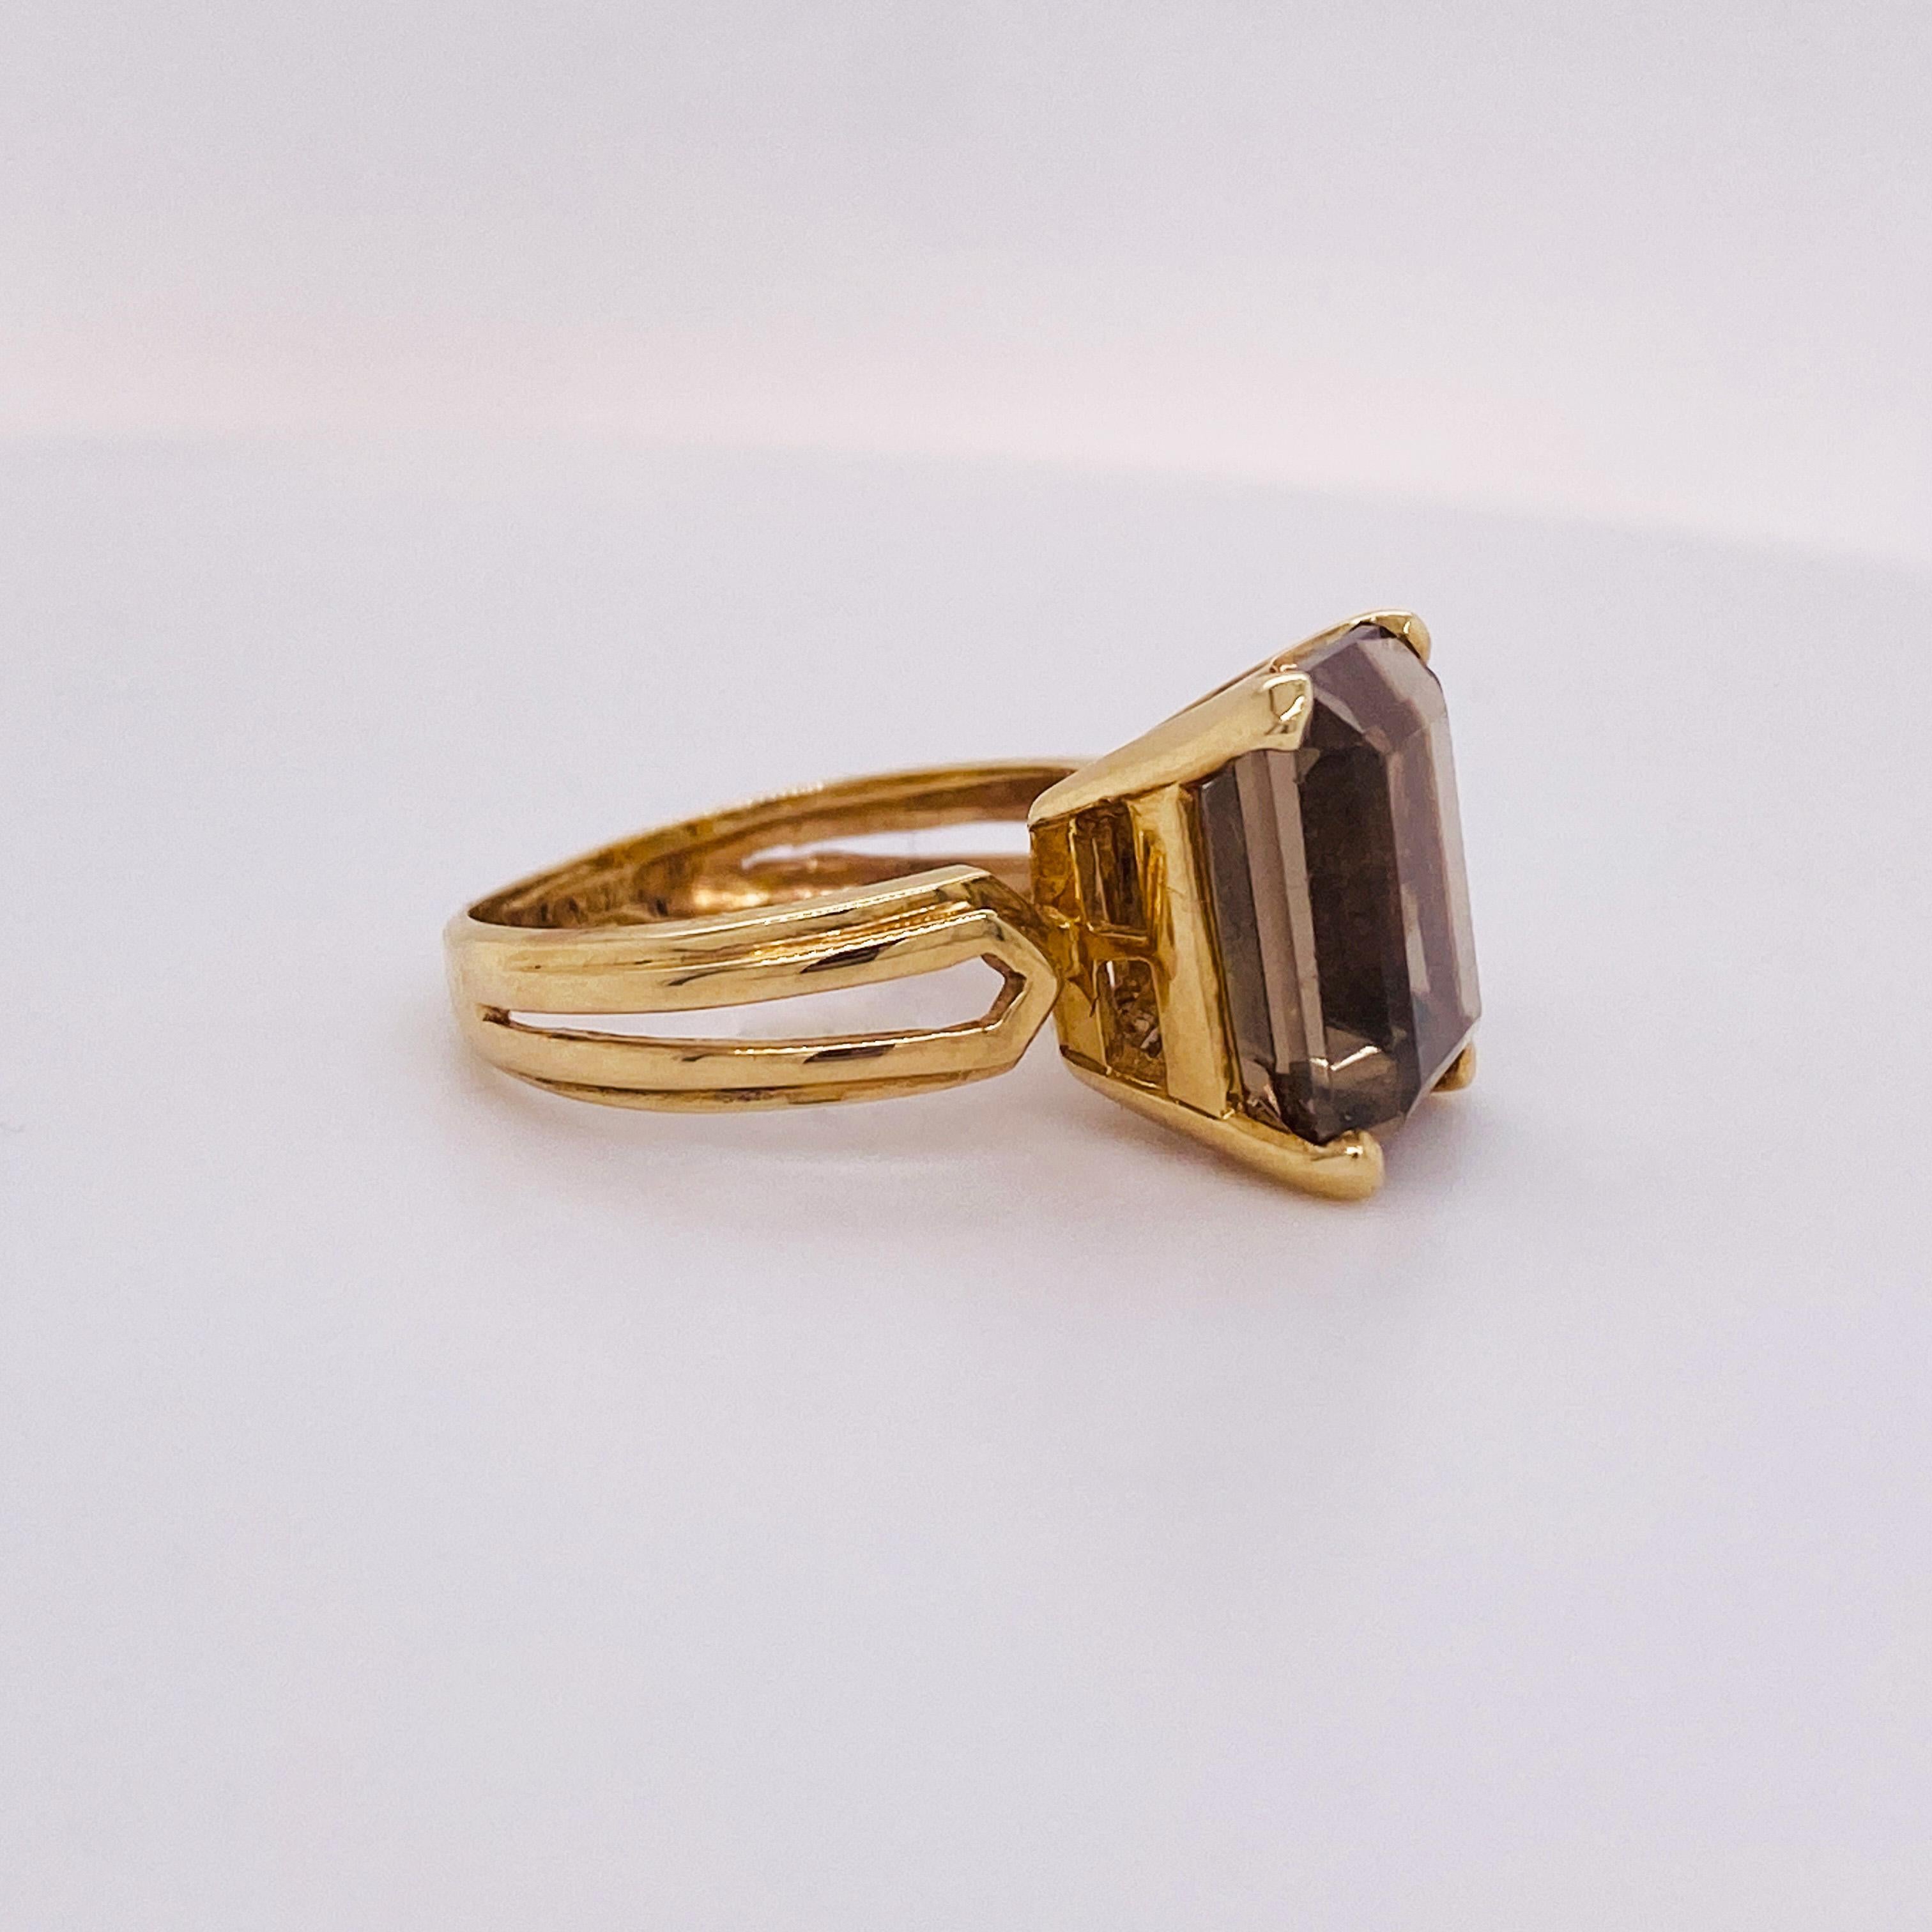 This Smokey Quartz Ring is very unique with the emerald cut 4.50 carat gemstone. The band of the ring is very special with a split and double bevel. The ring is solid 14 karat yellow gold and currently a size 5.5 but it is sizable. Your local